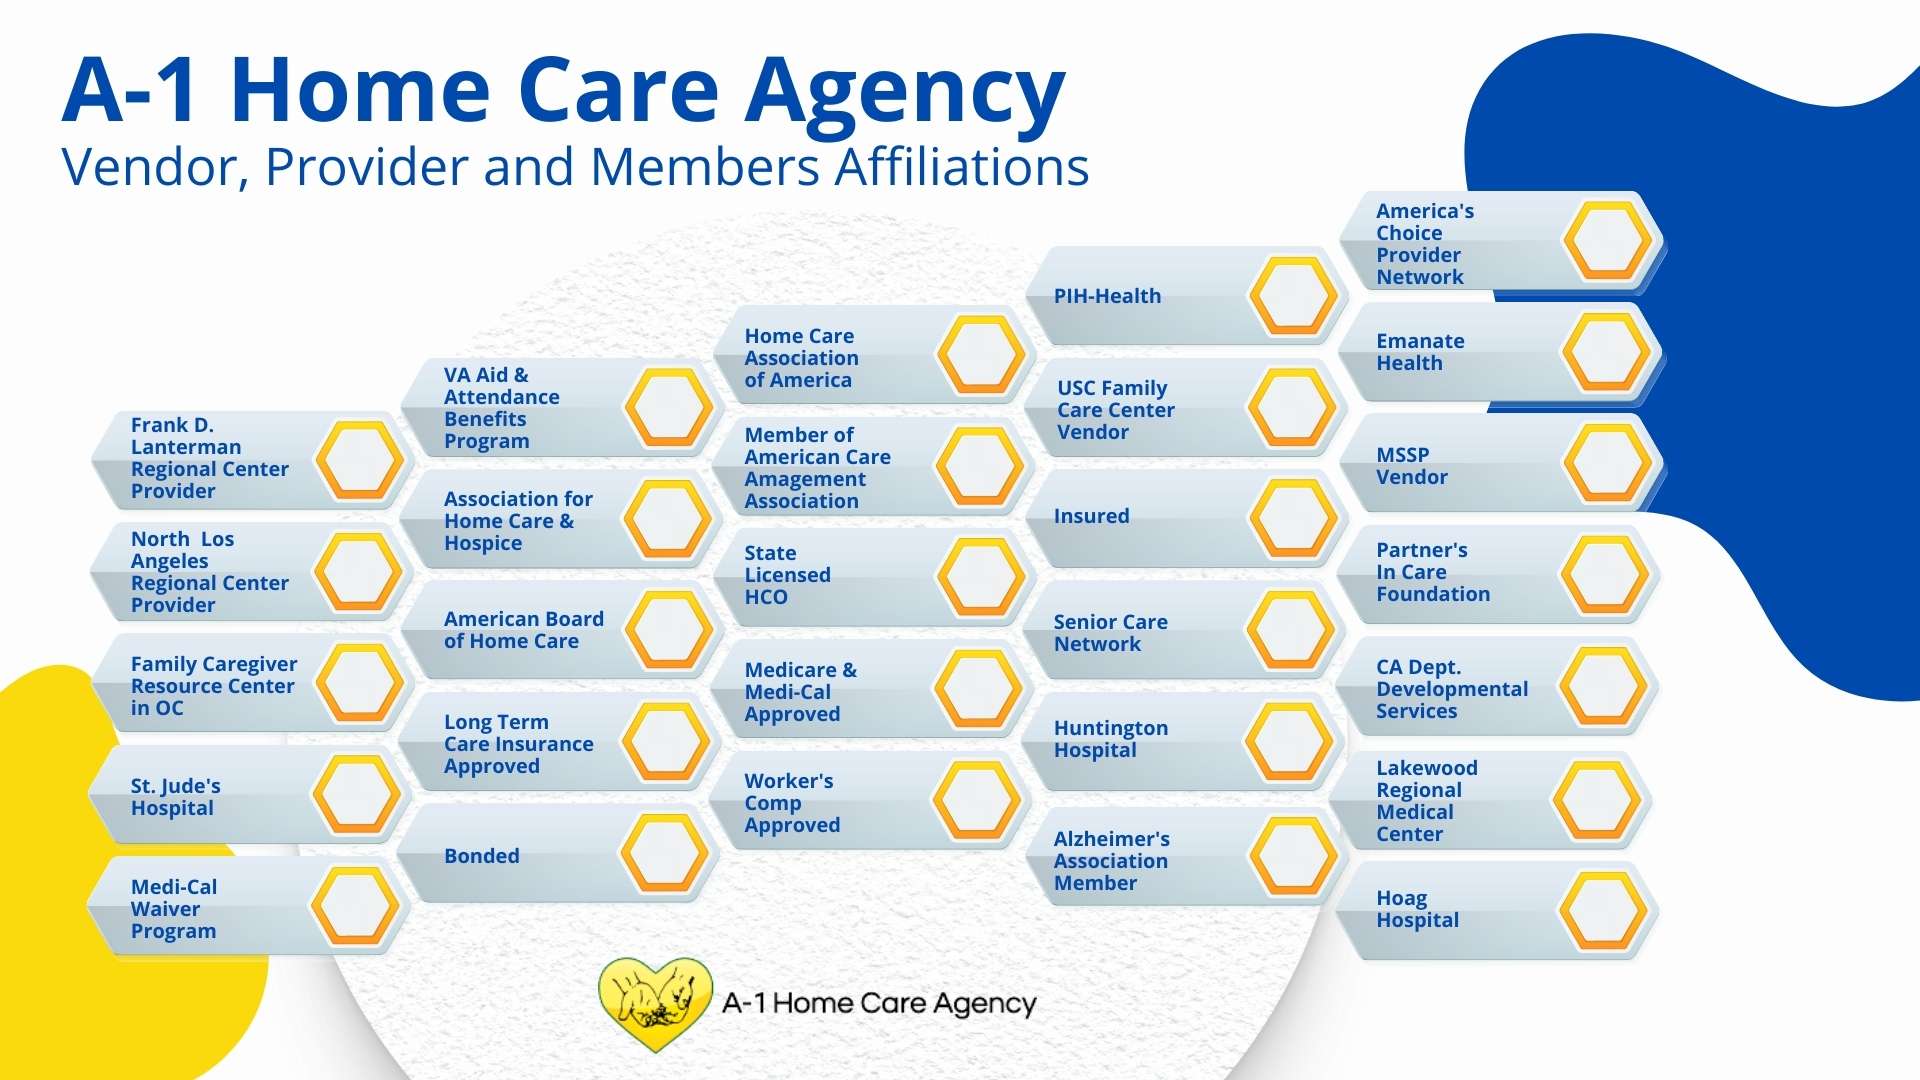 A-1 Home Care Agency - Vendor, Provider and Members Affiliations